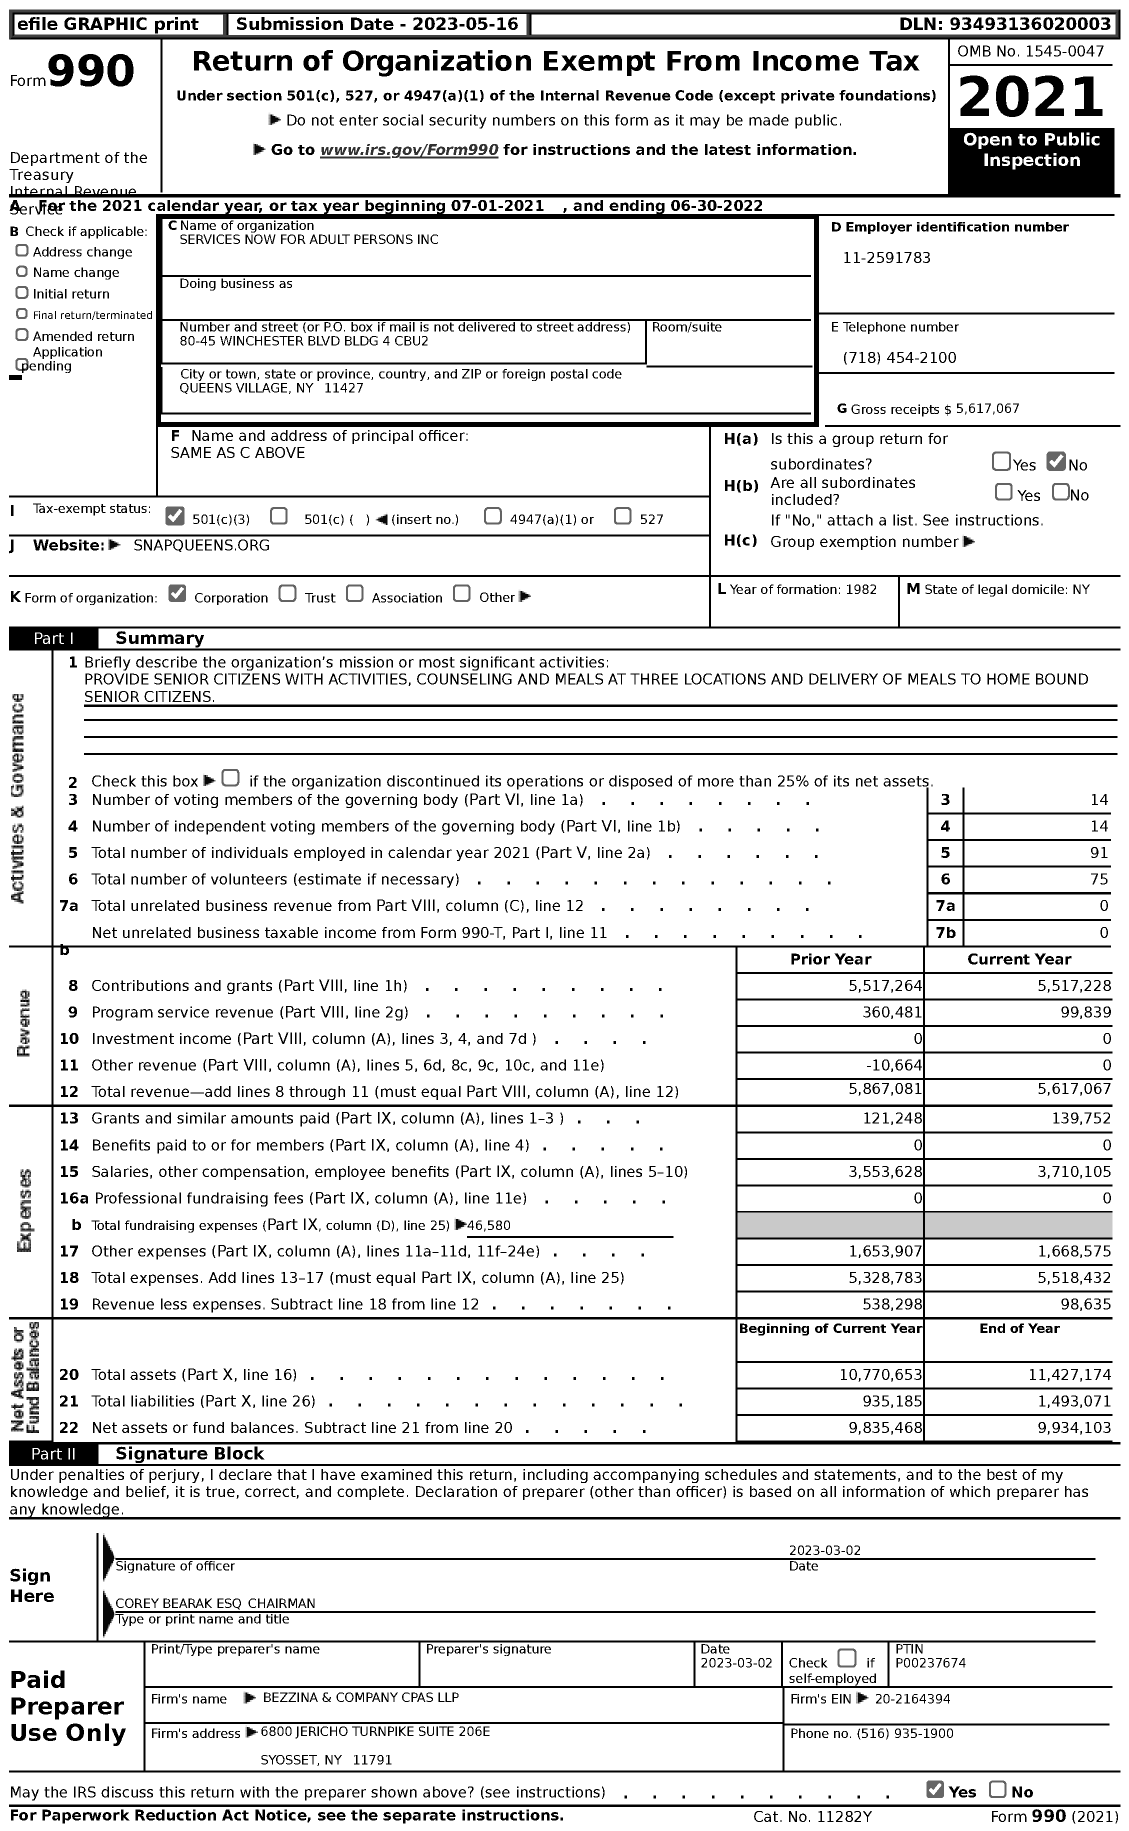 Image of first page of 2021 Form 990 for Services Now for Adult Persons (SNAP)